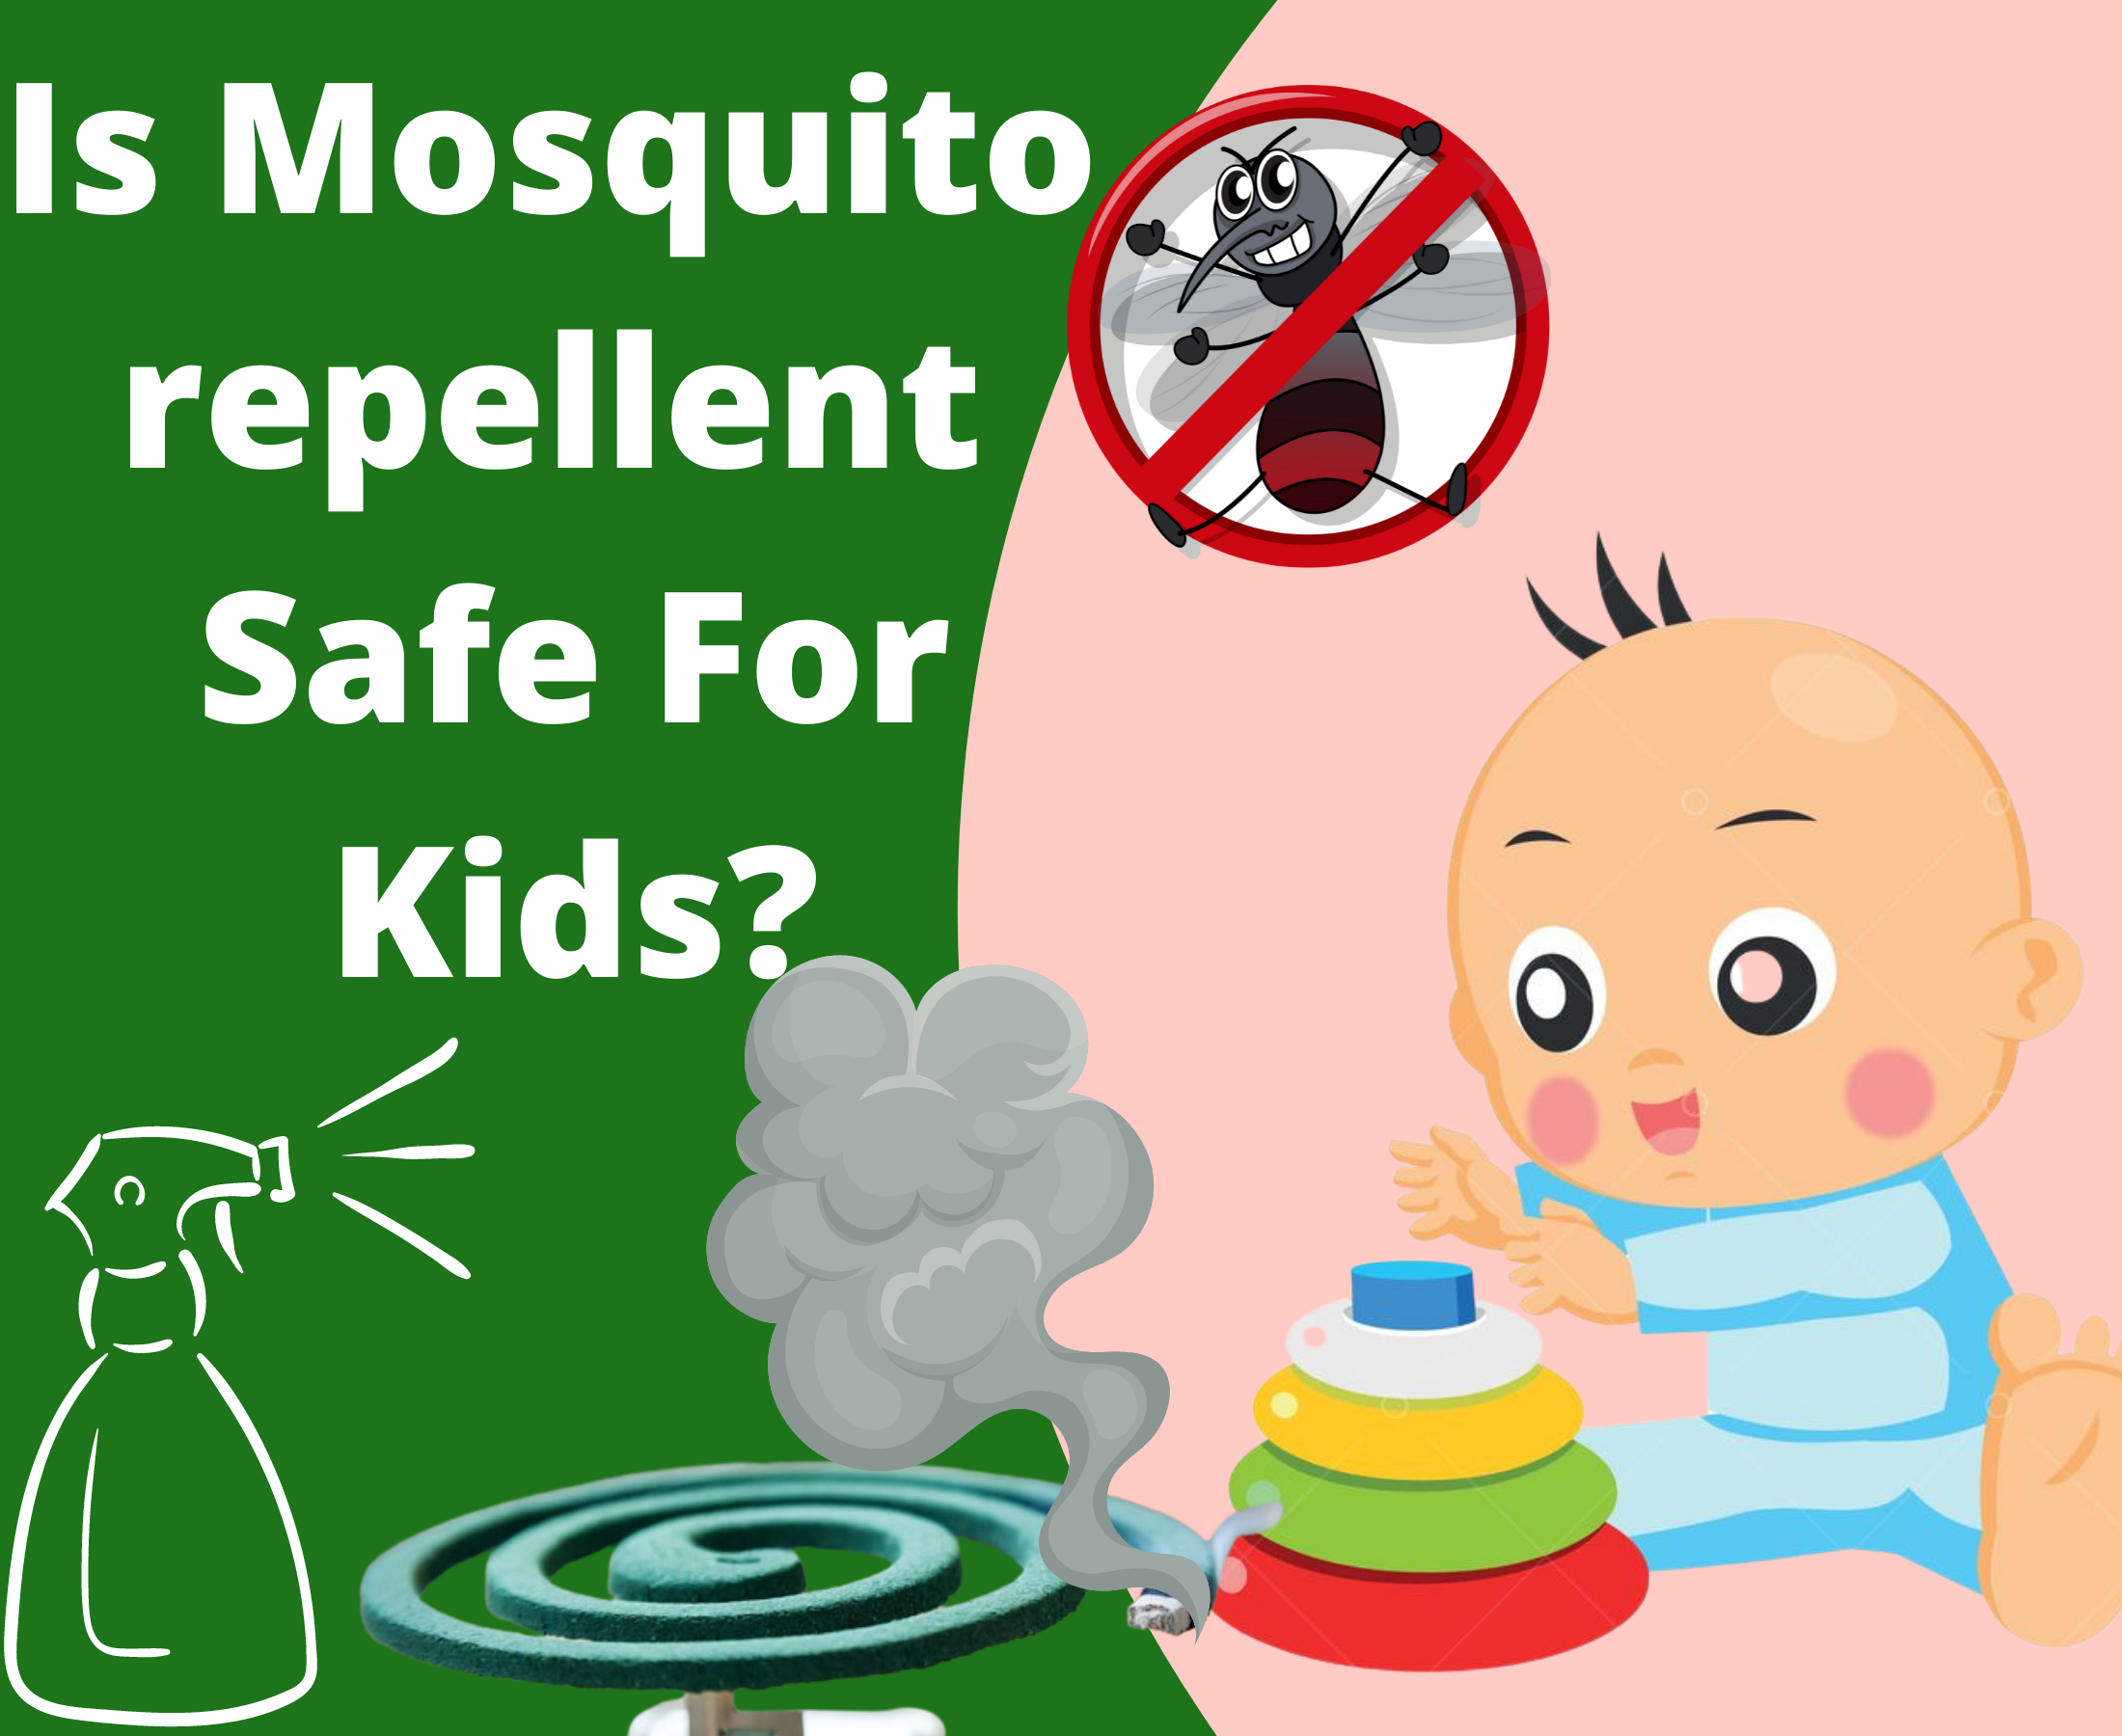 What if a child swallows toxic mosquito repellent?